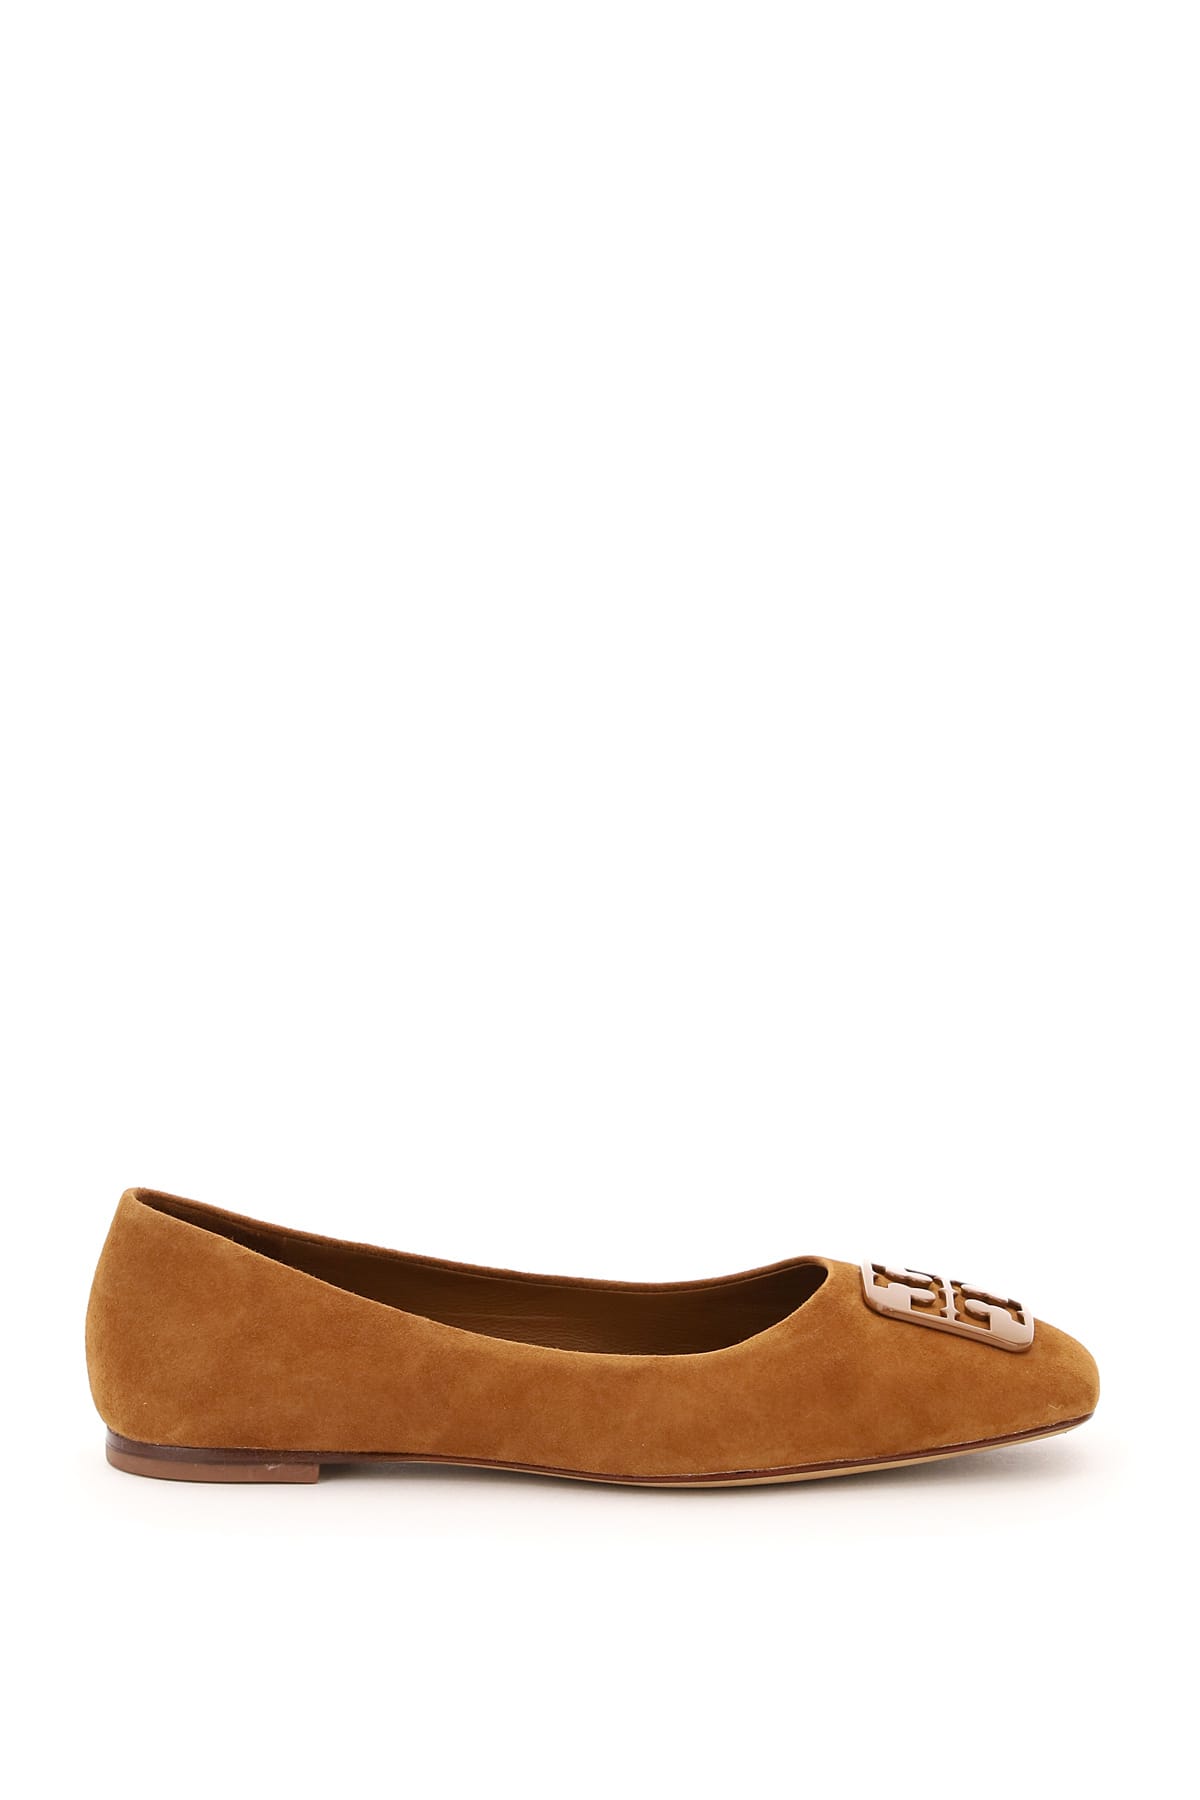 Buy Tory Burch Georgia Suede Ballet Flats online, shop Tory Burch shoes with free shipping